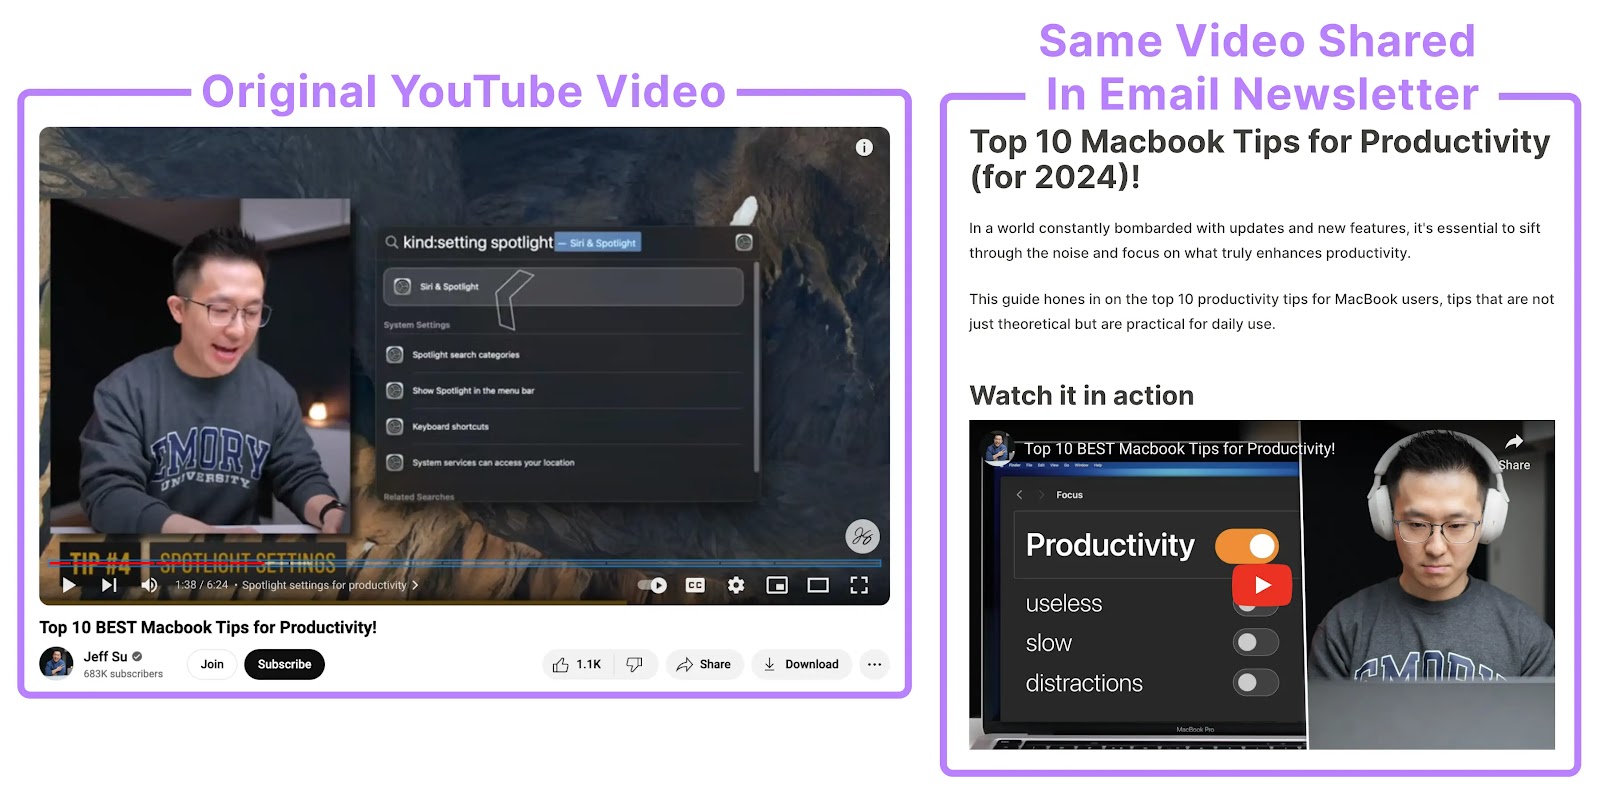 Original YouTube video (left) and the same video shared in a newsletter (right)